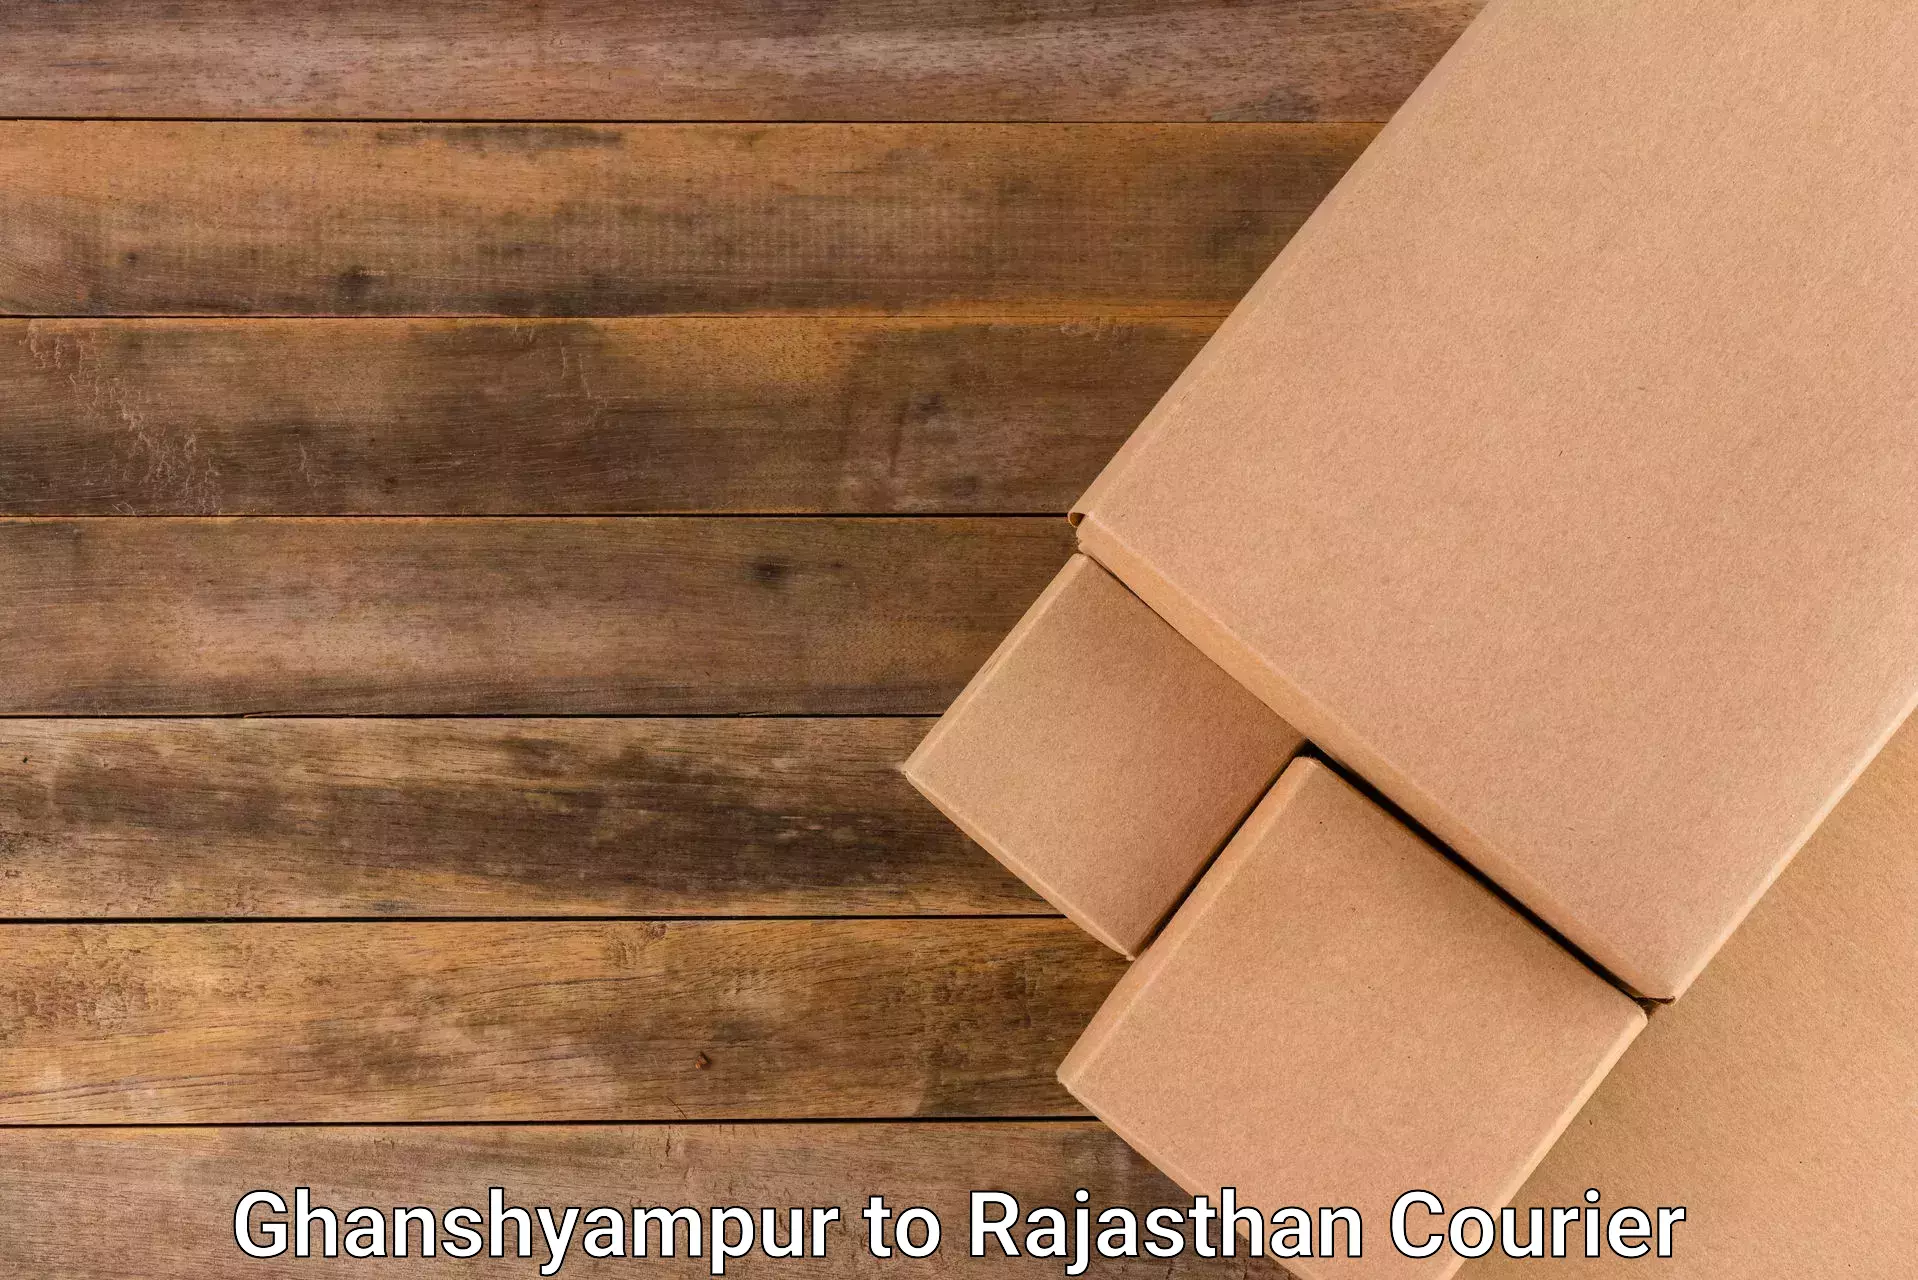 Full-service courier options Ghanshyampur to Laxmangarh